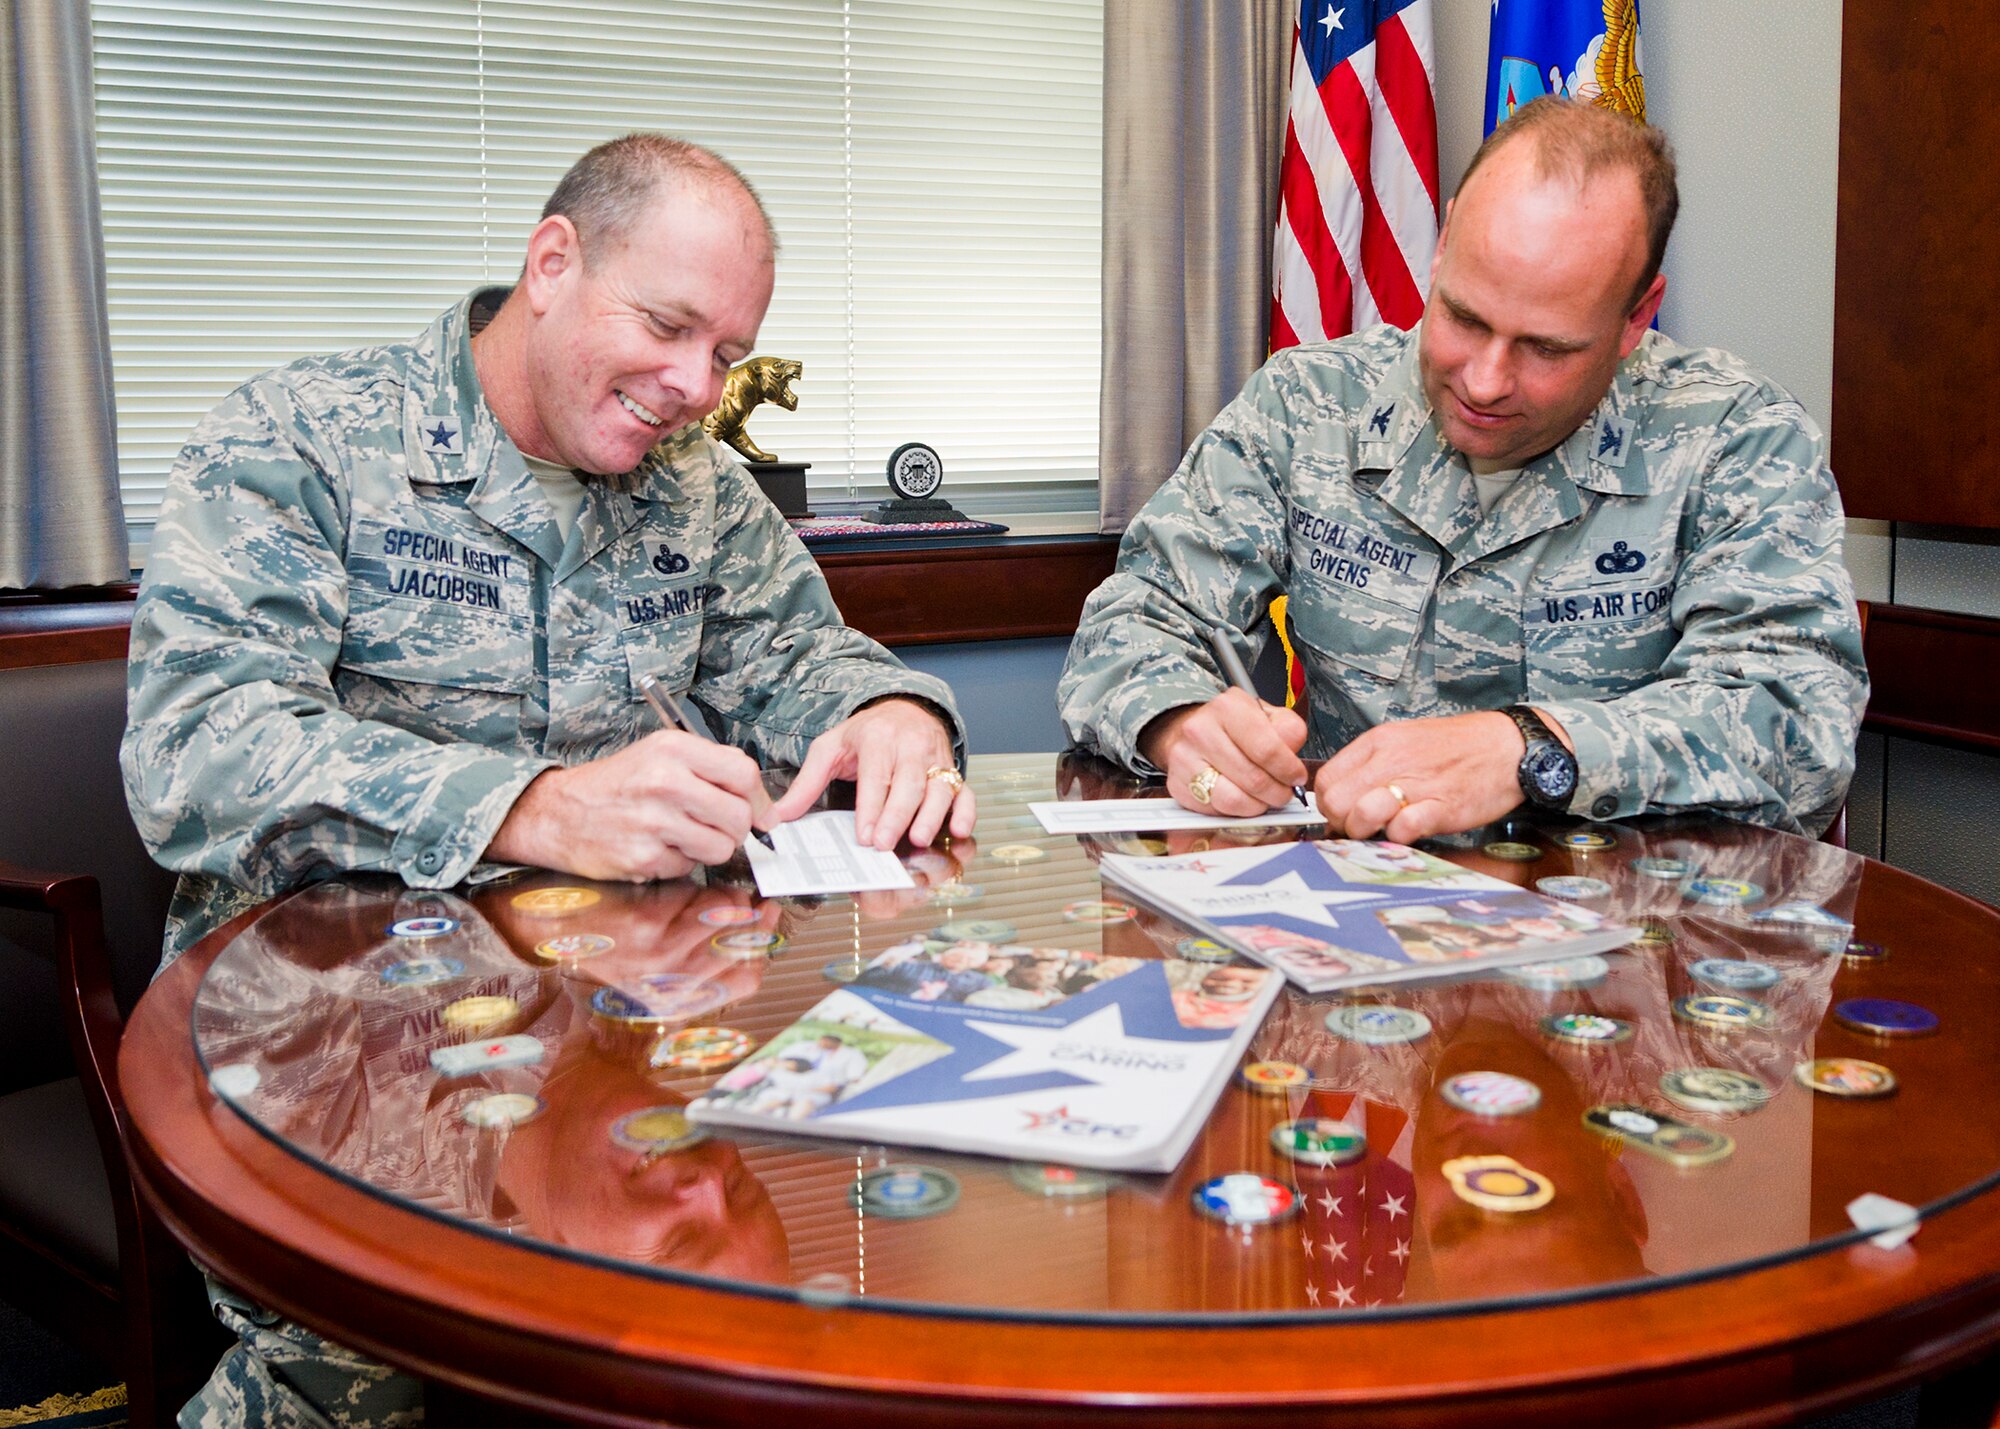 Brig. Gen. Kevin Jacobsen, OSI commander, left, and Col. Keith Givens, OSI vice commander, sign their CFC contribution forms at OSI headquarters. OSI HQ exceeded its unofficial CFC goal of $40,000 by more than $19,000 in the 2011 CFC season. (U.S. Air Force photo by Mr. Mike Hastings.)